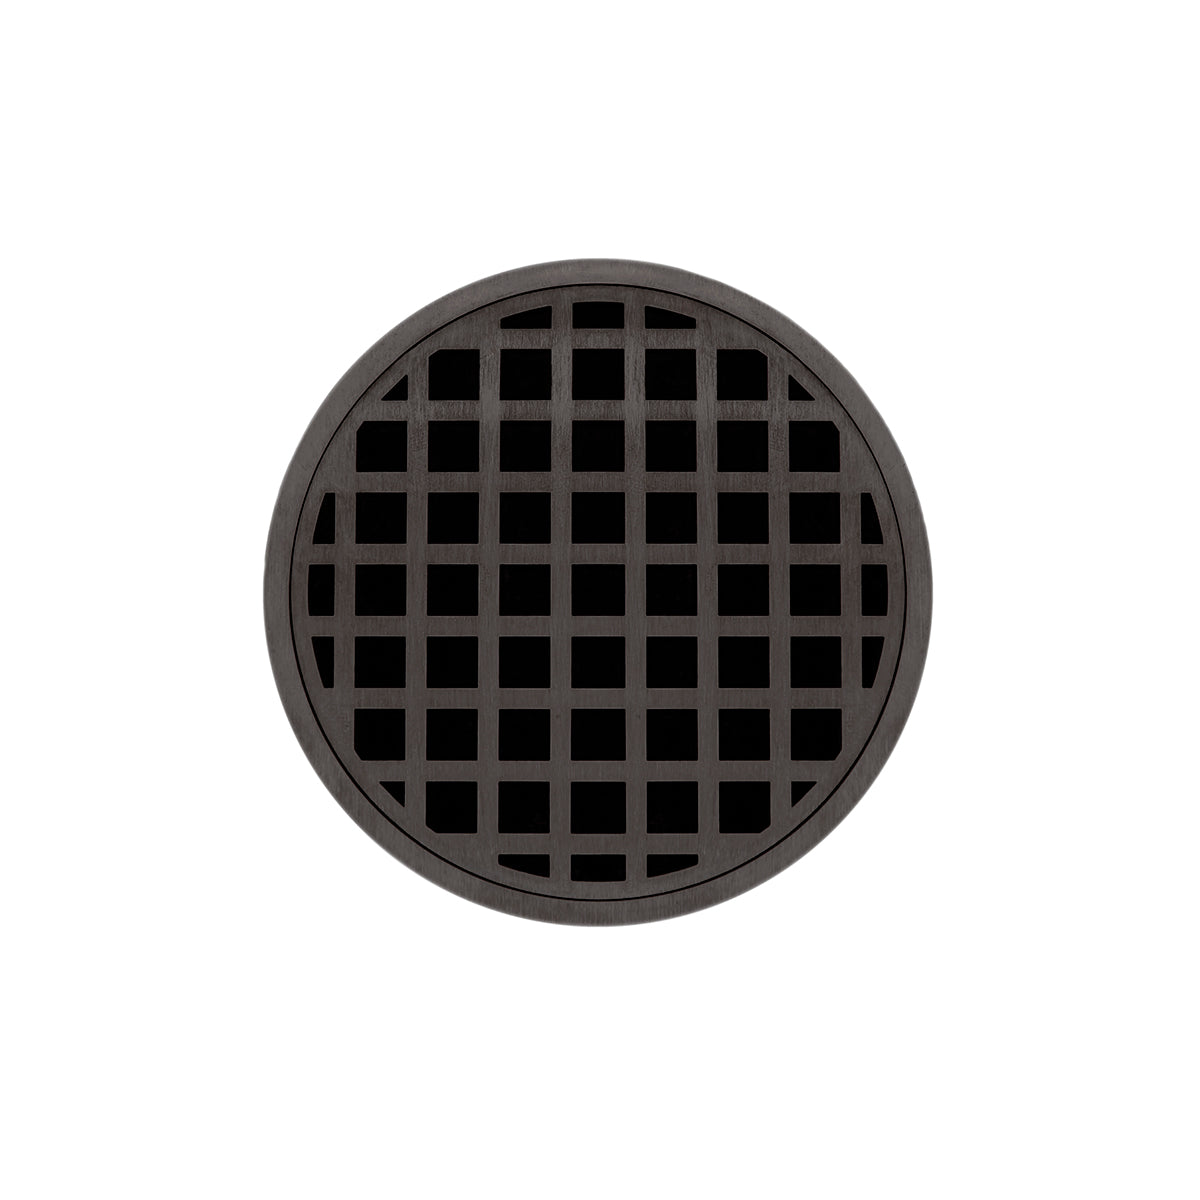 Infinity Drain 5" Round RQD 5 High Flow Premium Center Drain Kit with Squares Pattern Decorative Plate with Cast Iron Drain Body, 3" No-Hub Outlet